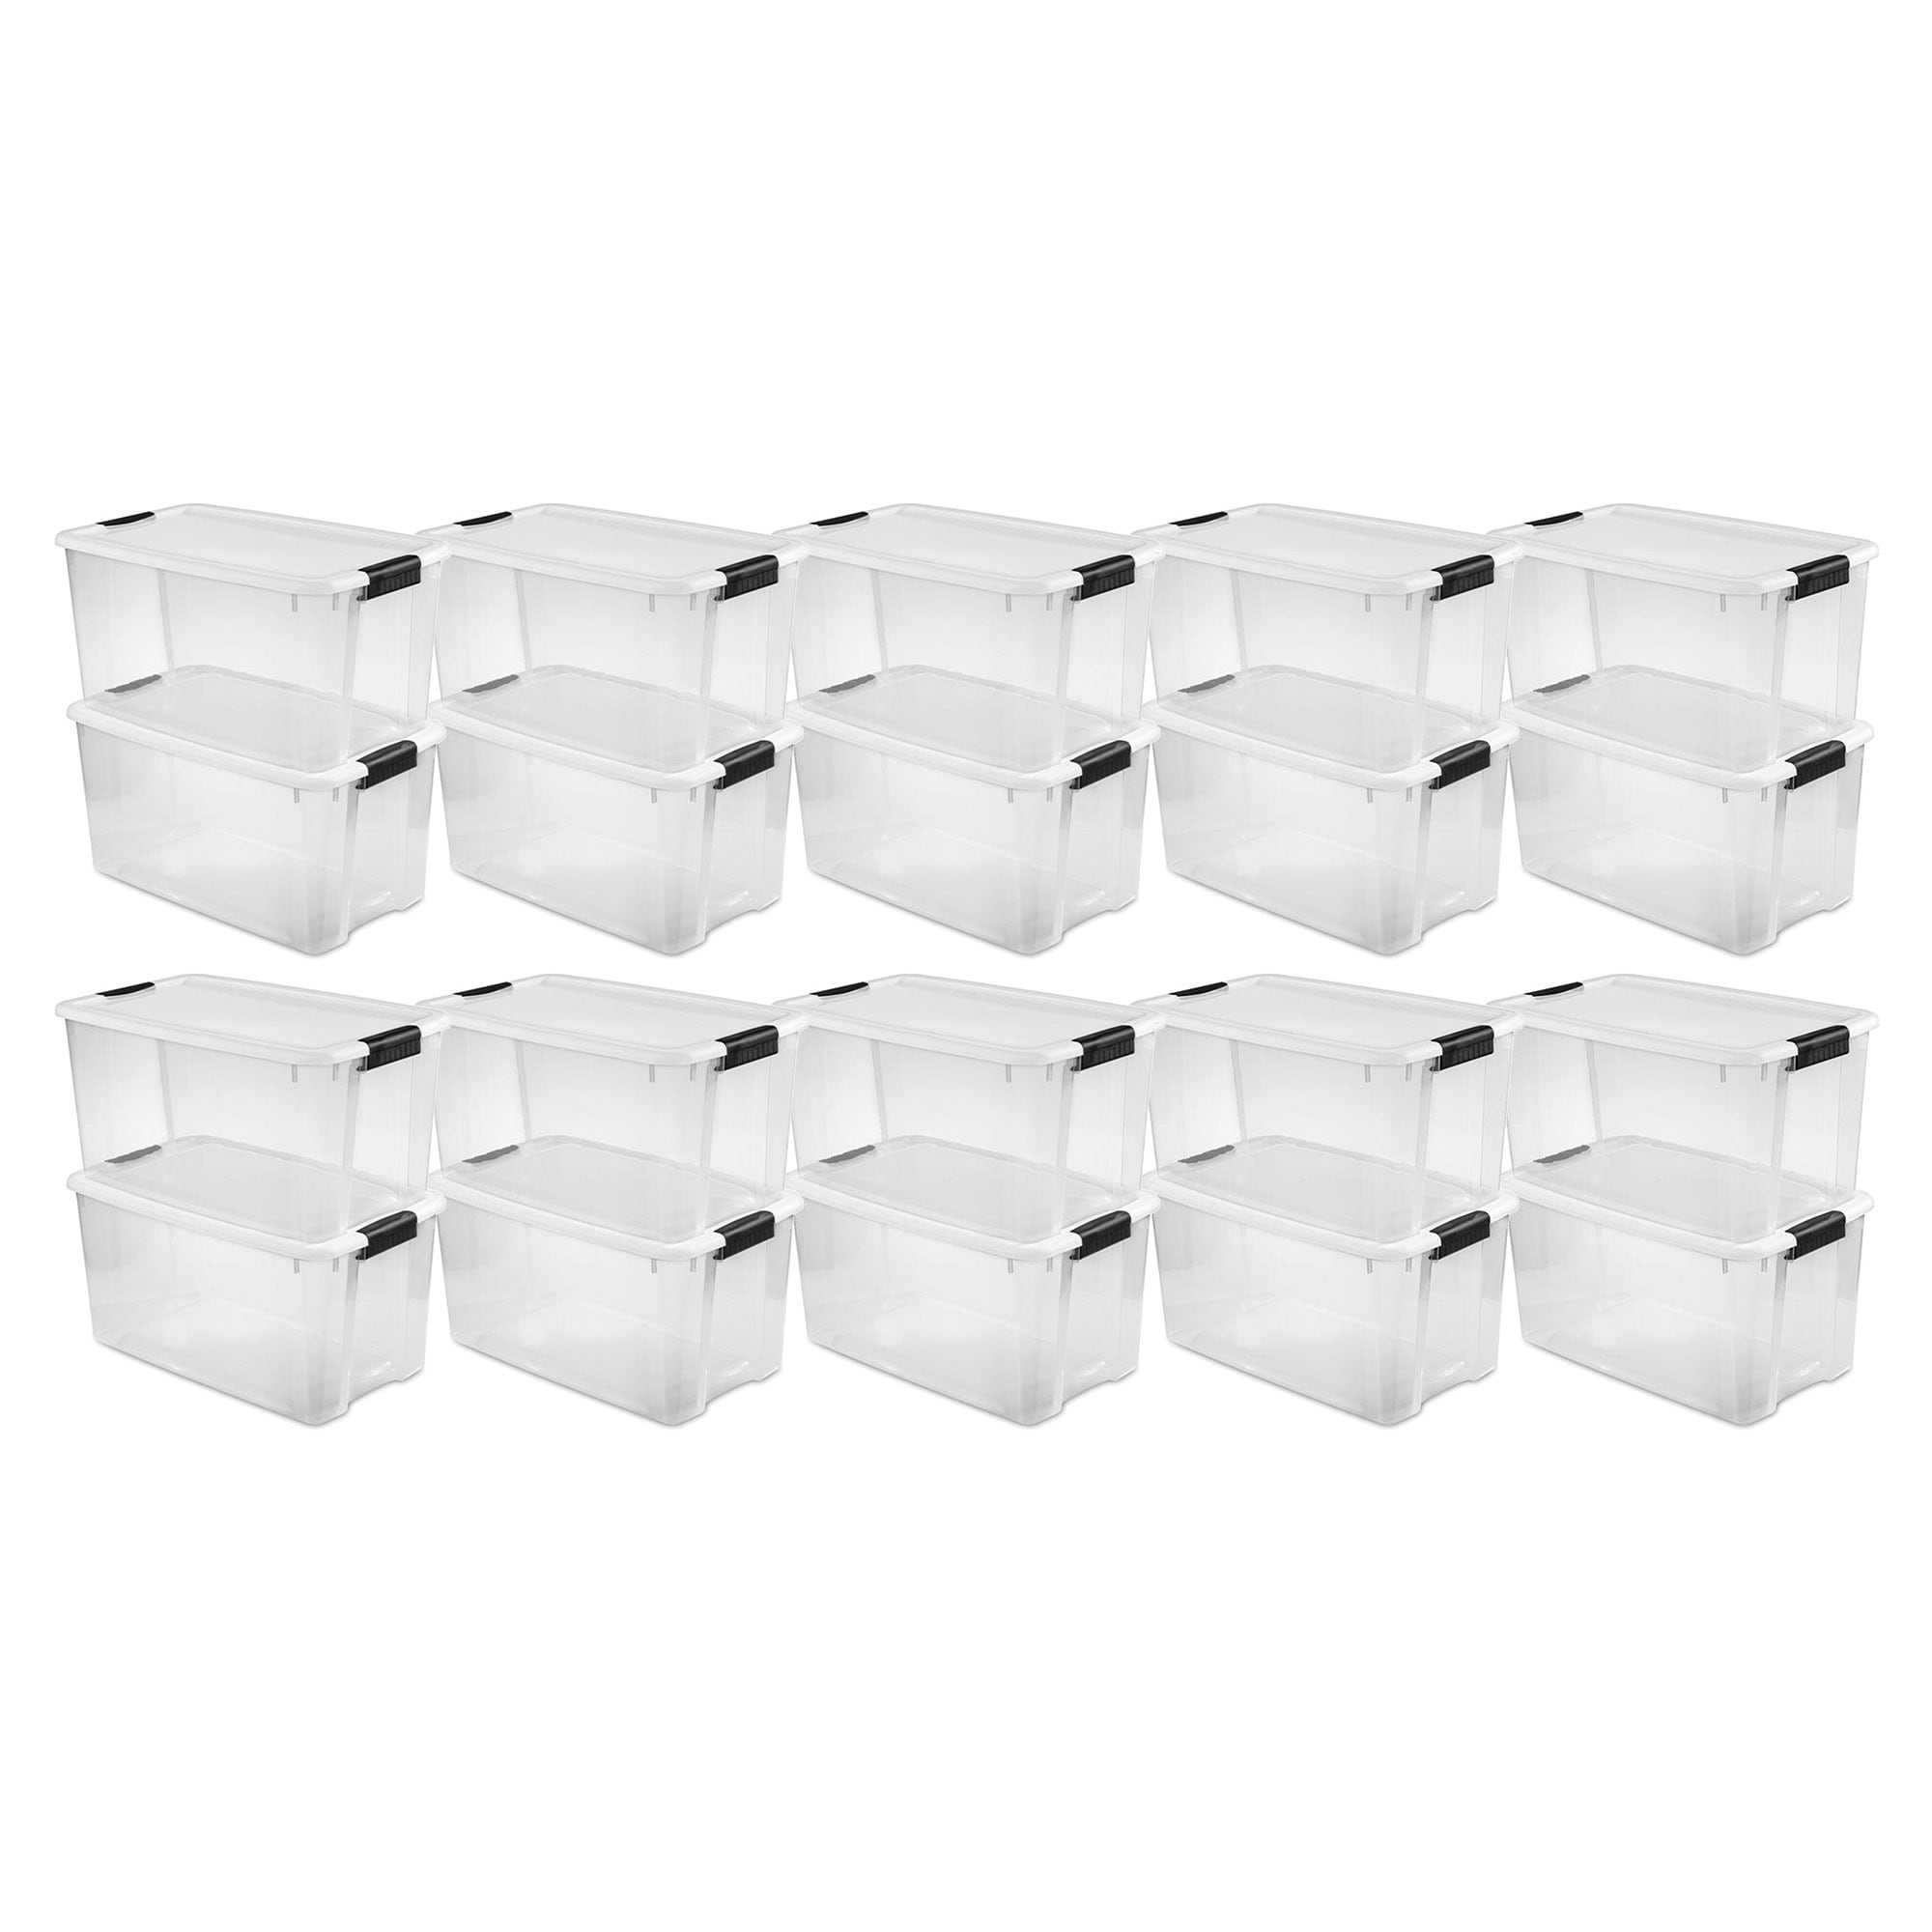 Sterilite 70 Quart Multipurpose Stackable Plastic Latching Lid Storage  Tote, 4 Pack & 6 Quart Container Box Bin for Home Organization, Clear 12  Pack